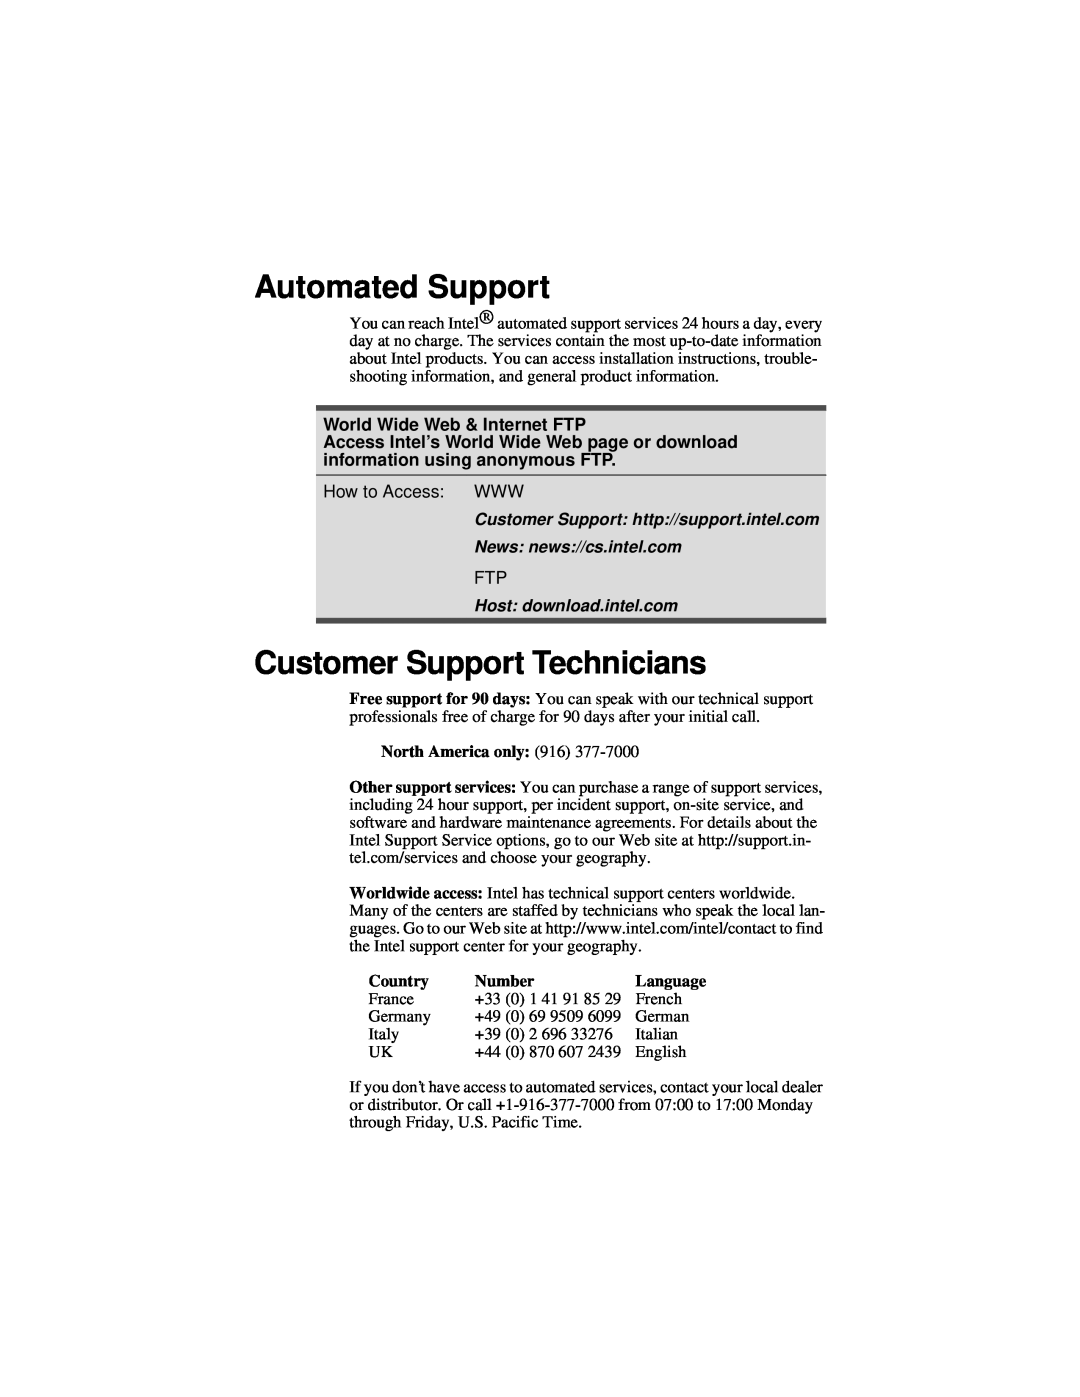 Intel 1000SX manual Automated Support, Customer Support Technicians, World Wide Web & Internet FTP, Host download.intel.com 